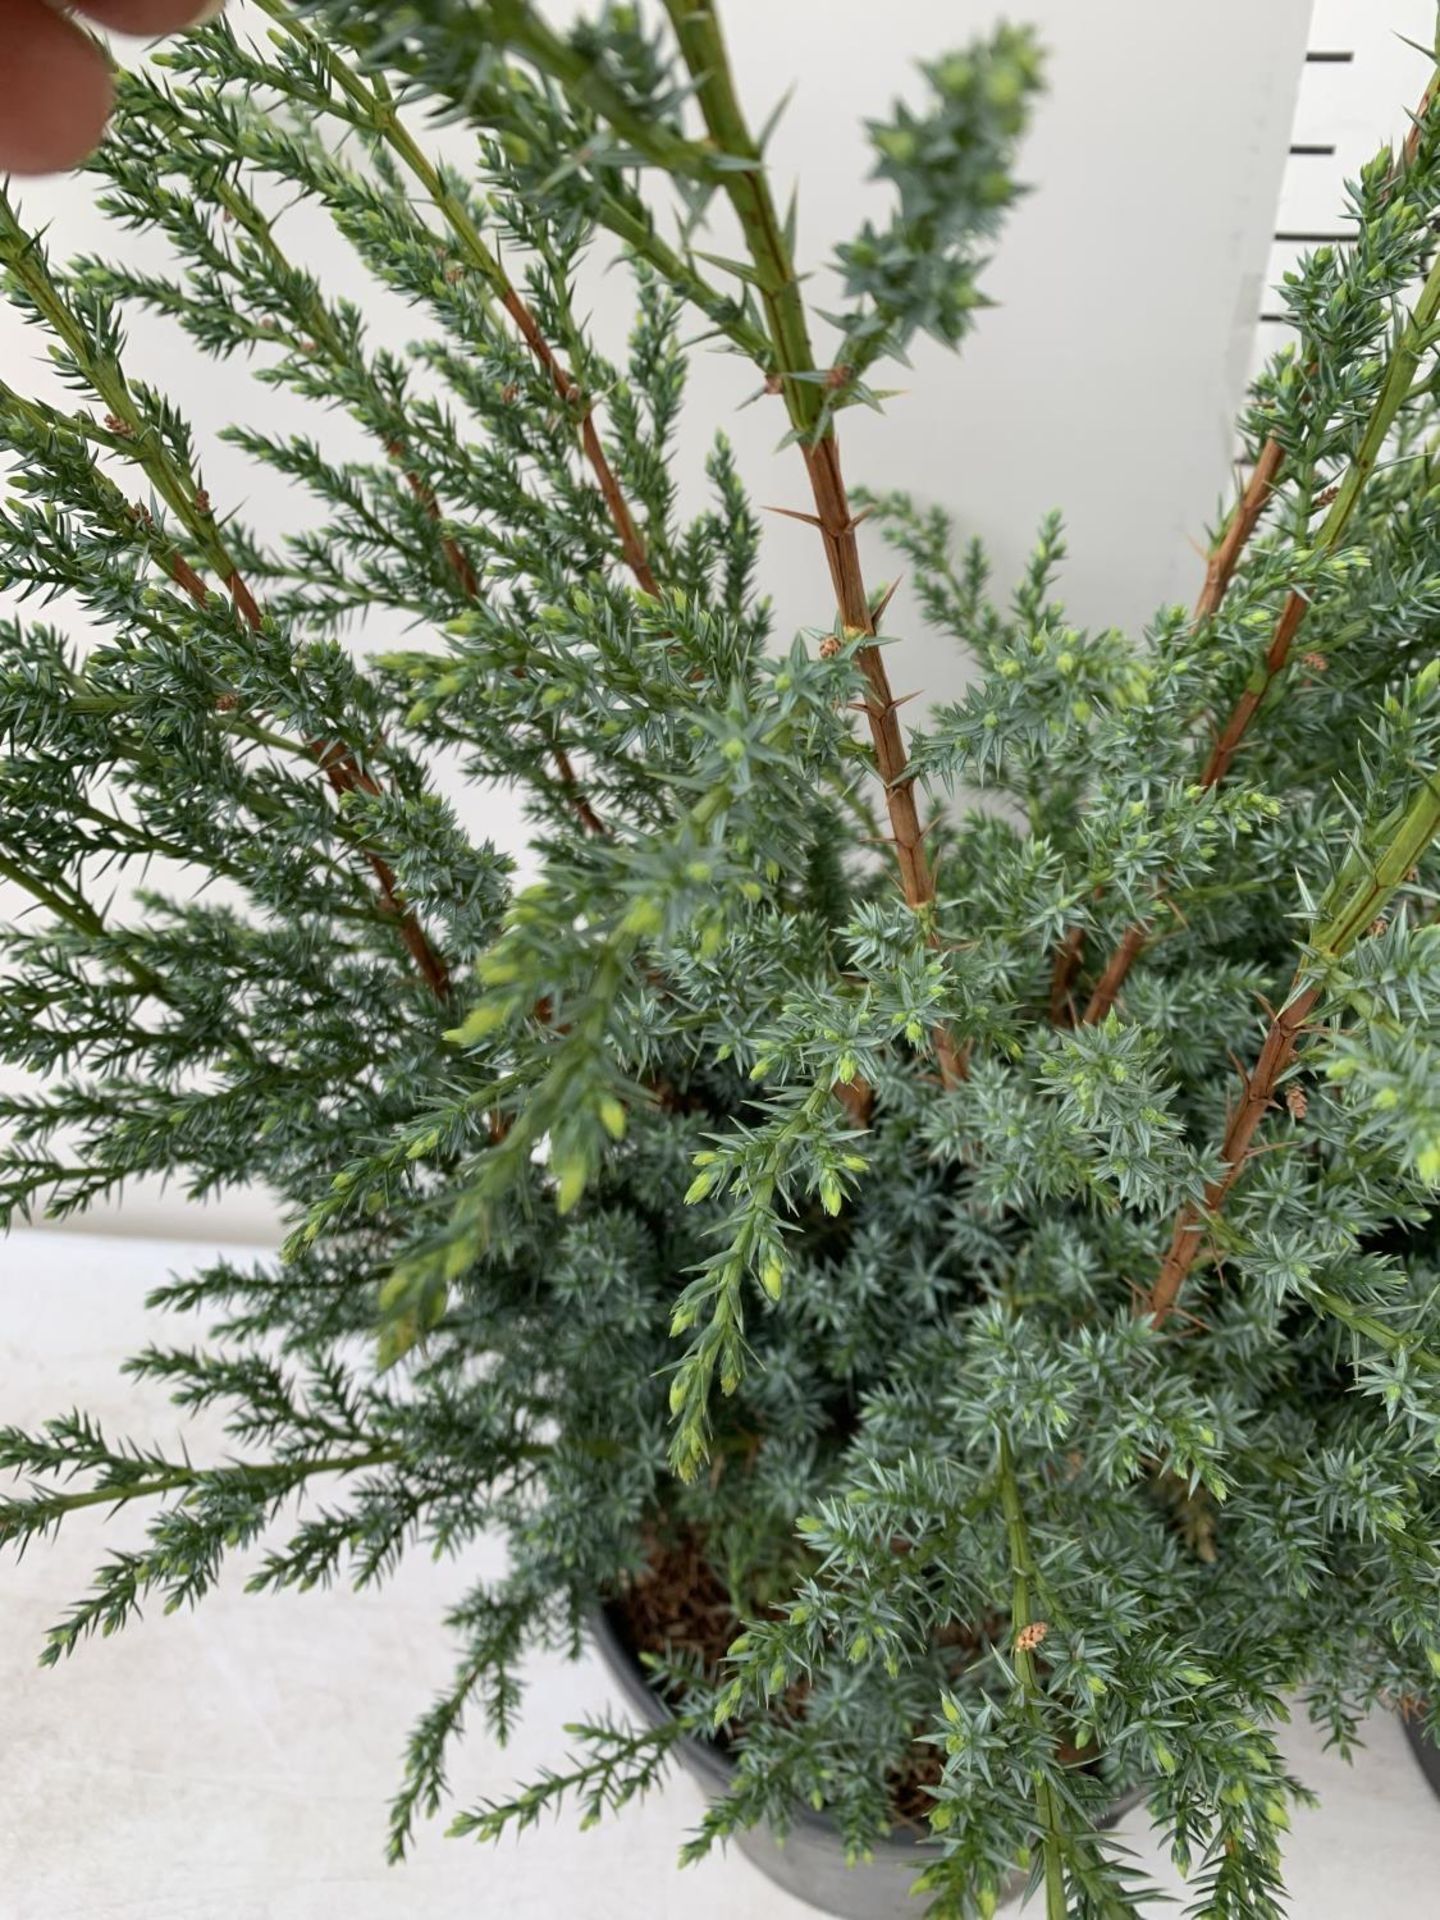 TWO JUNIPERUS CHINENSIS BLUE ALPS IN 7 LTR POTS A METRE IN HEIGHT PLUS VAT TO BE SOLD FOR THE TWO - Image 8 of 22